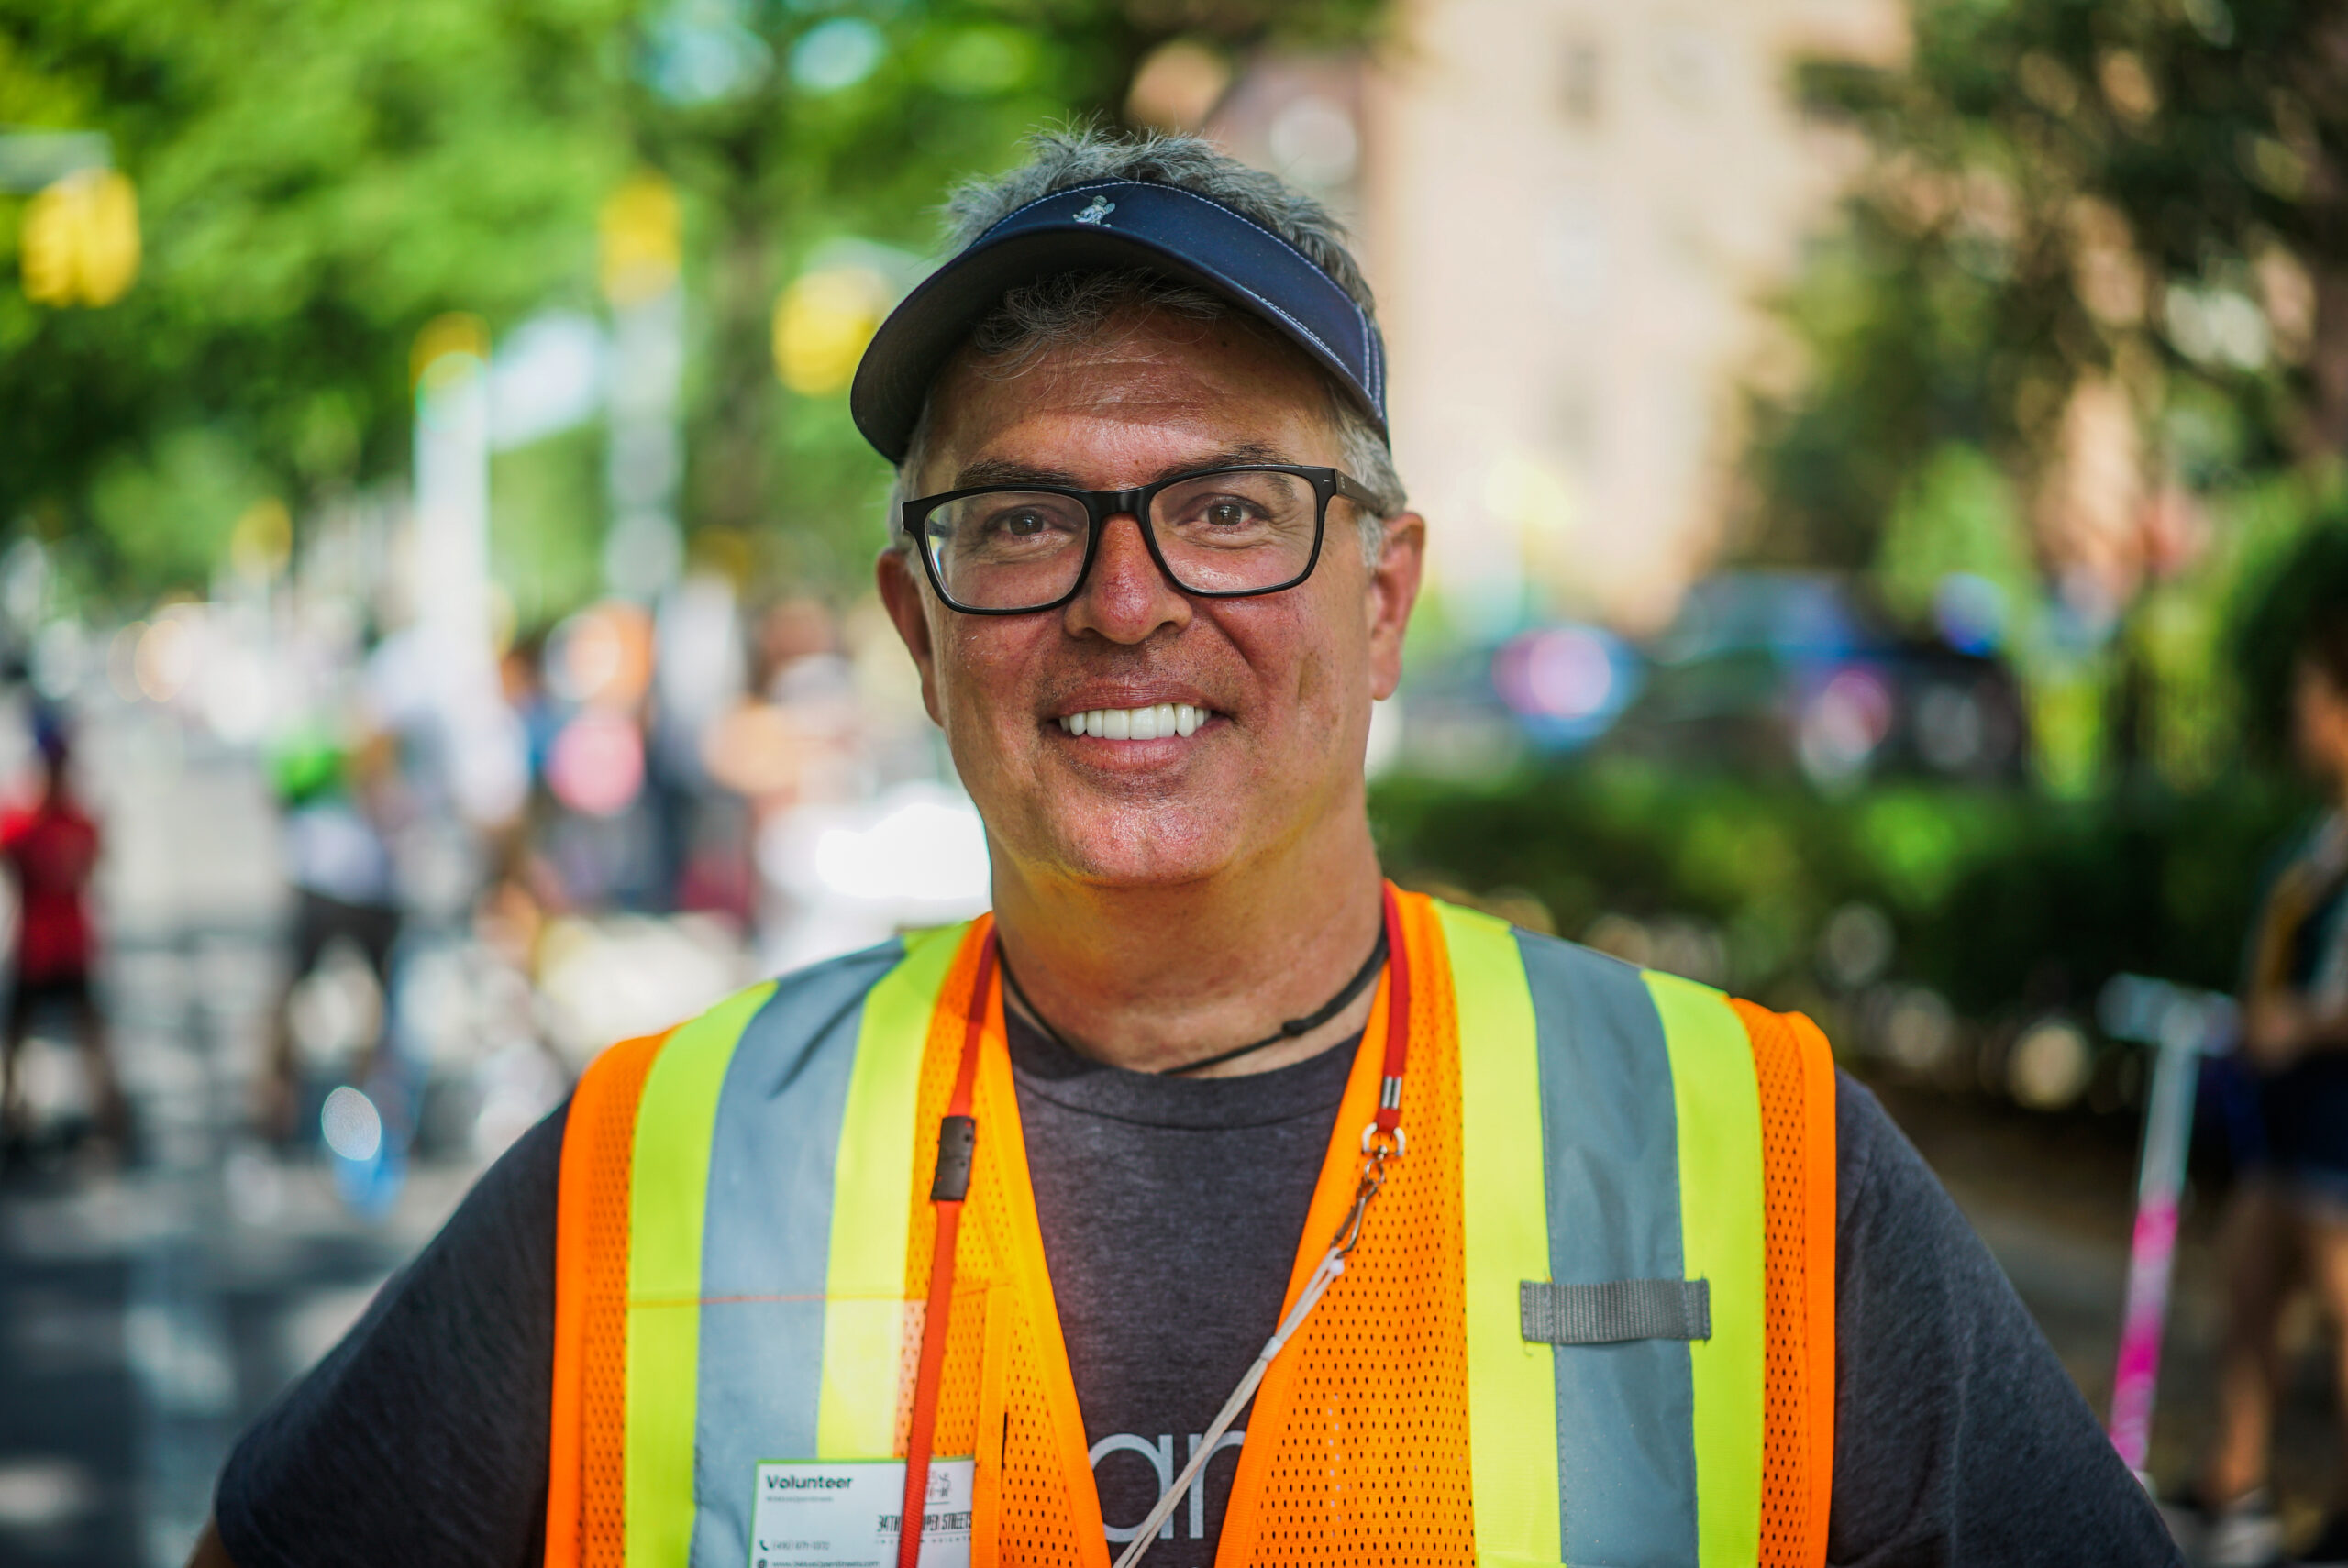 Jim Burke stands on 34th Avenue, looking at the camera and smiling. He wears a visor and a bright orange, high visibility safety vest. The sun is shining and figures of people are behind him.